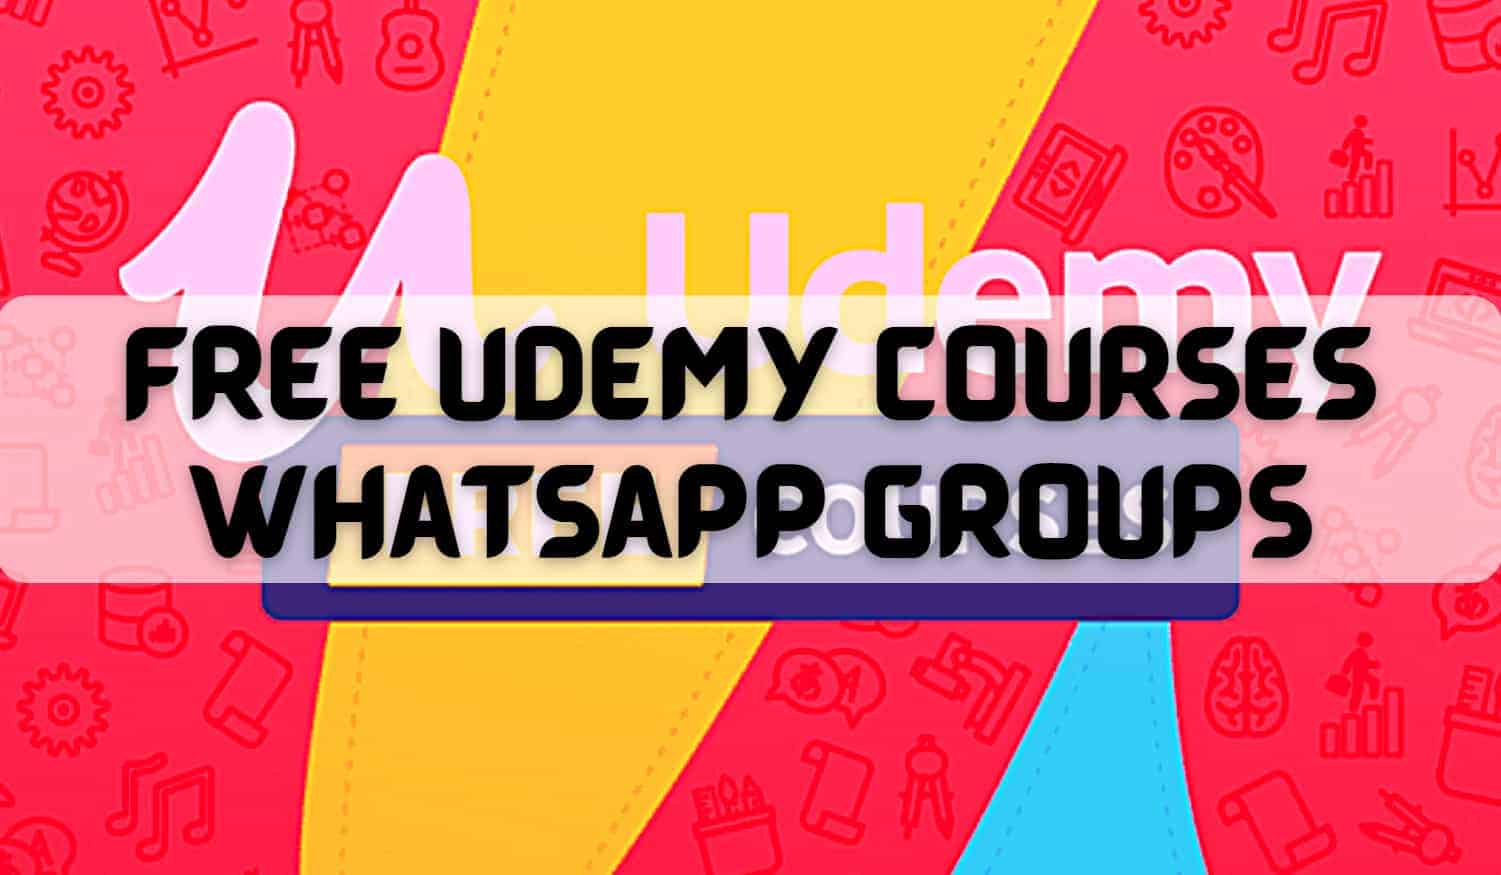 Free Udemy Courses Whatsapp Group Links